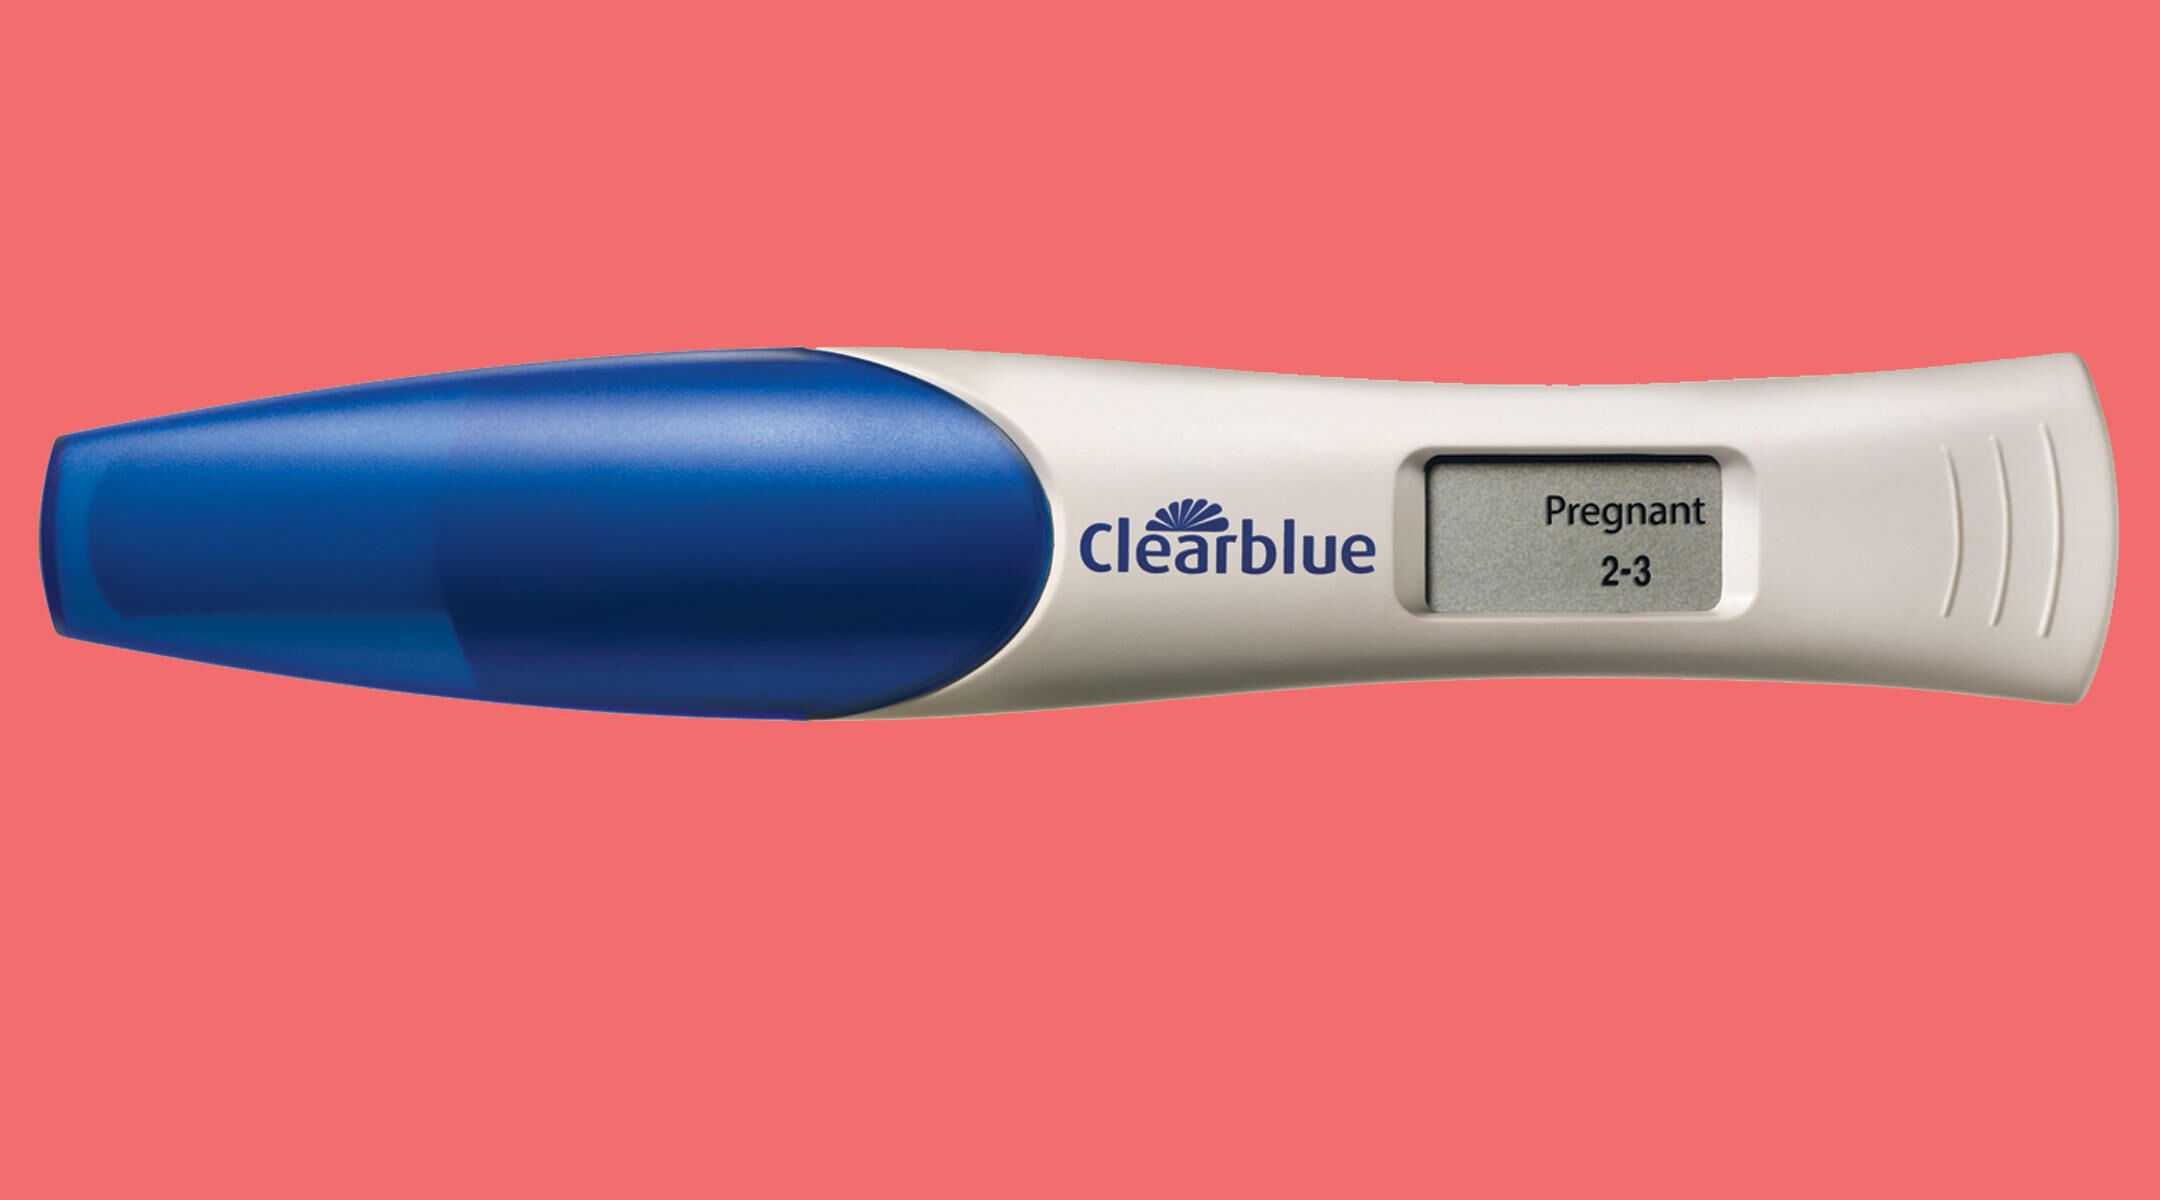 clearblue pregnancy test tell you how far along you are in your pregnancy